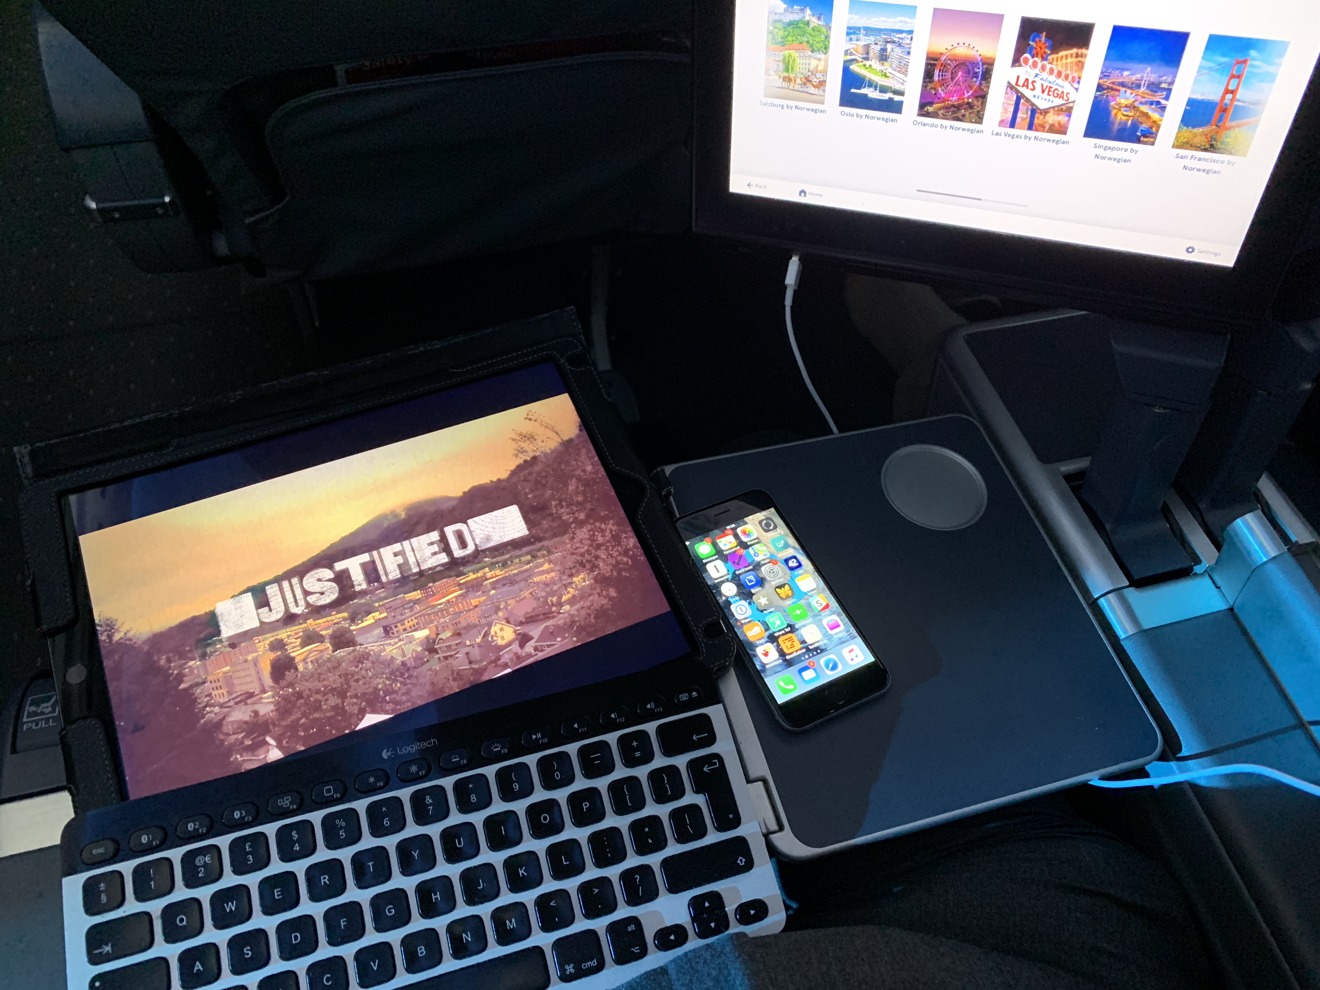 Do It Yourself Inflight Entertainment with TV series Justified on iPad